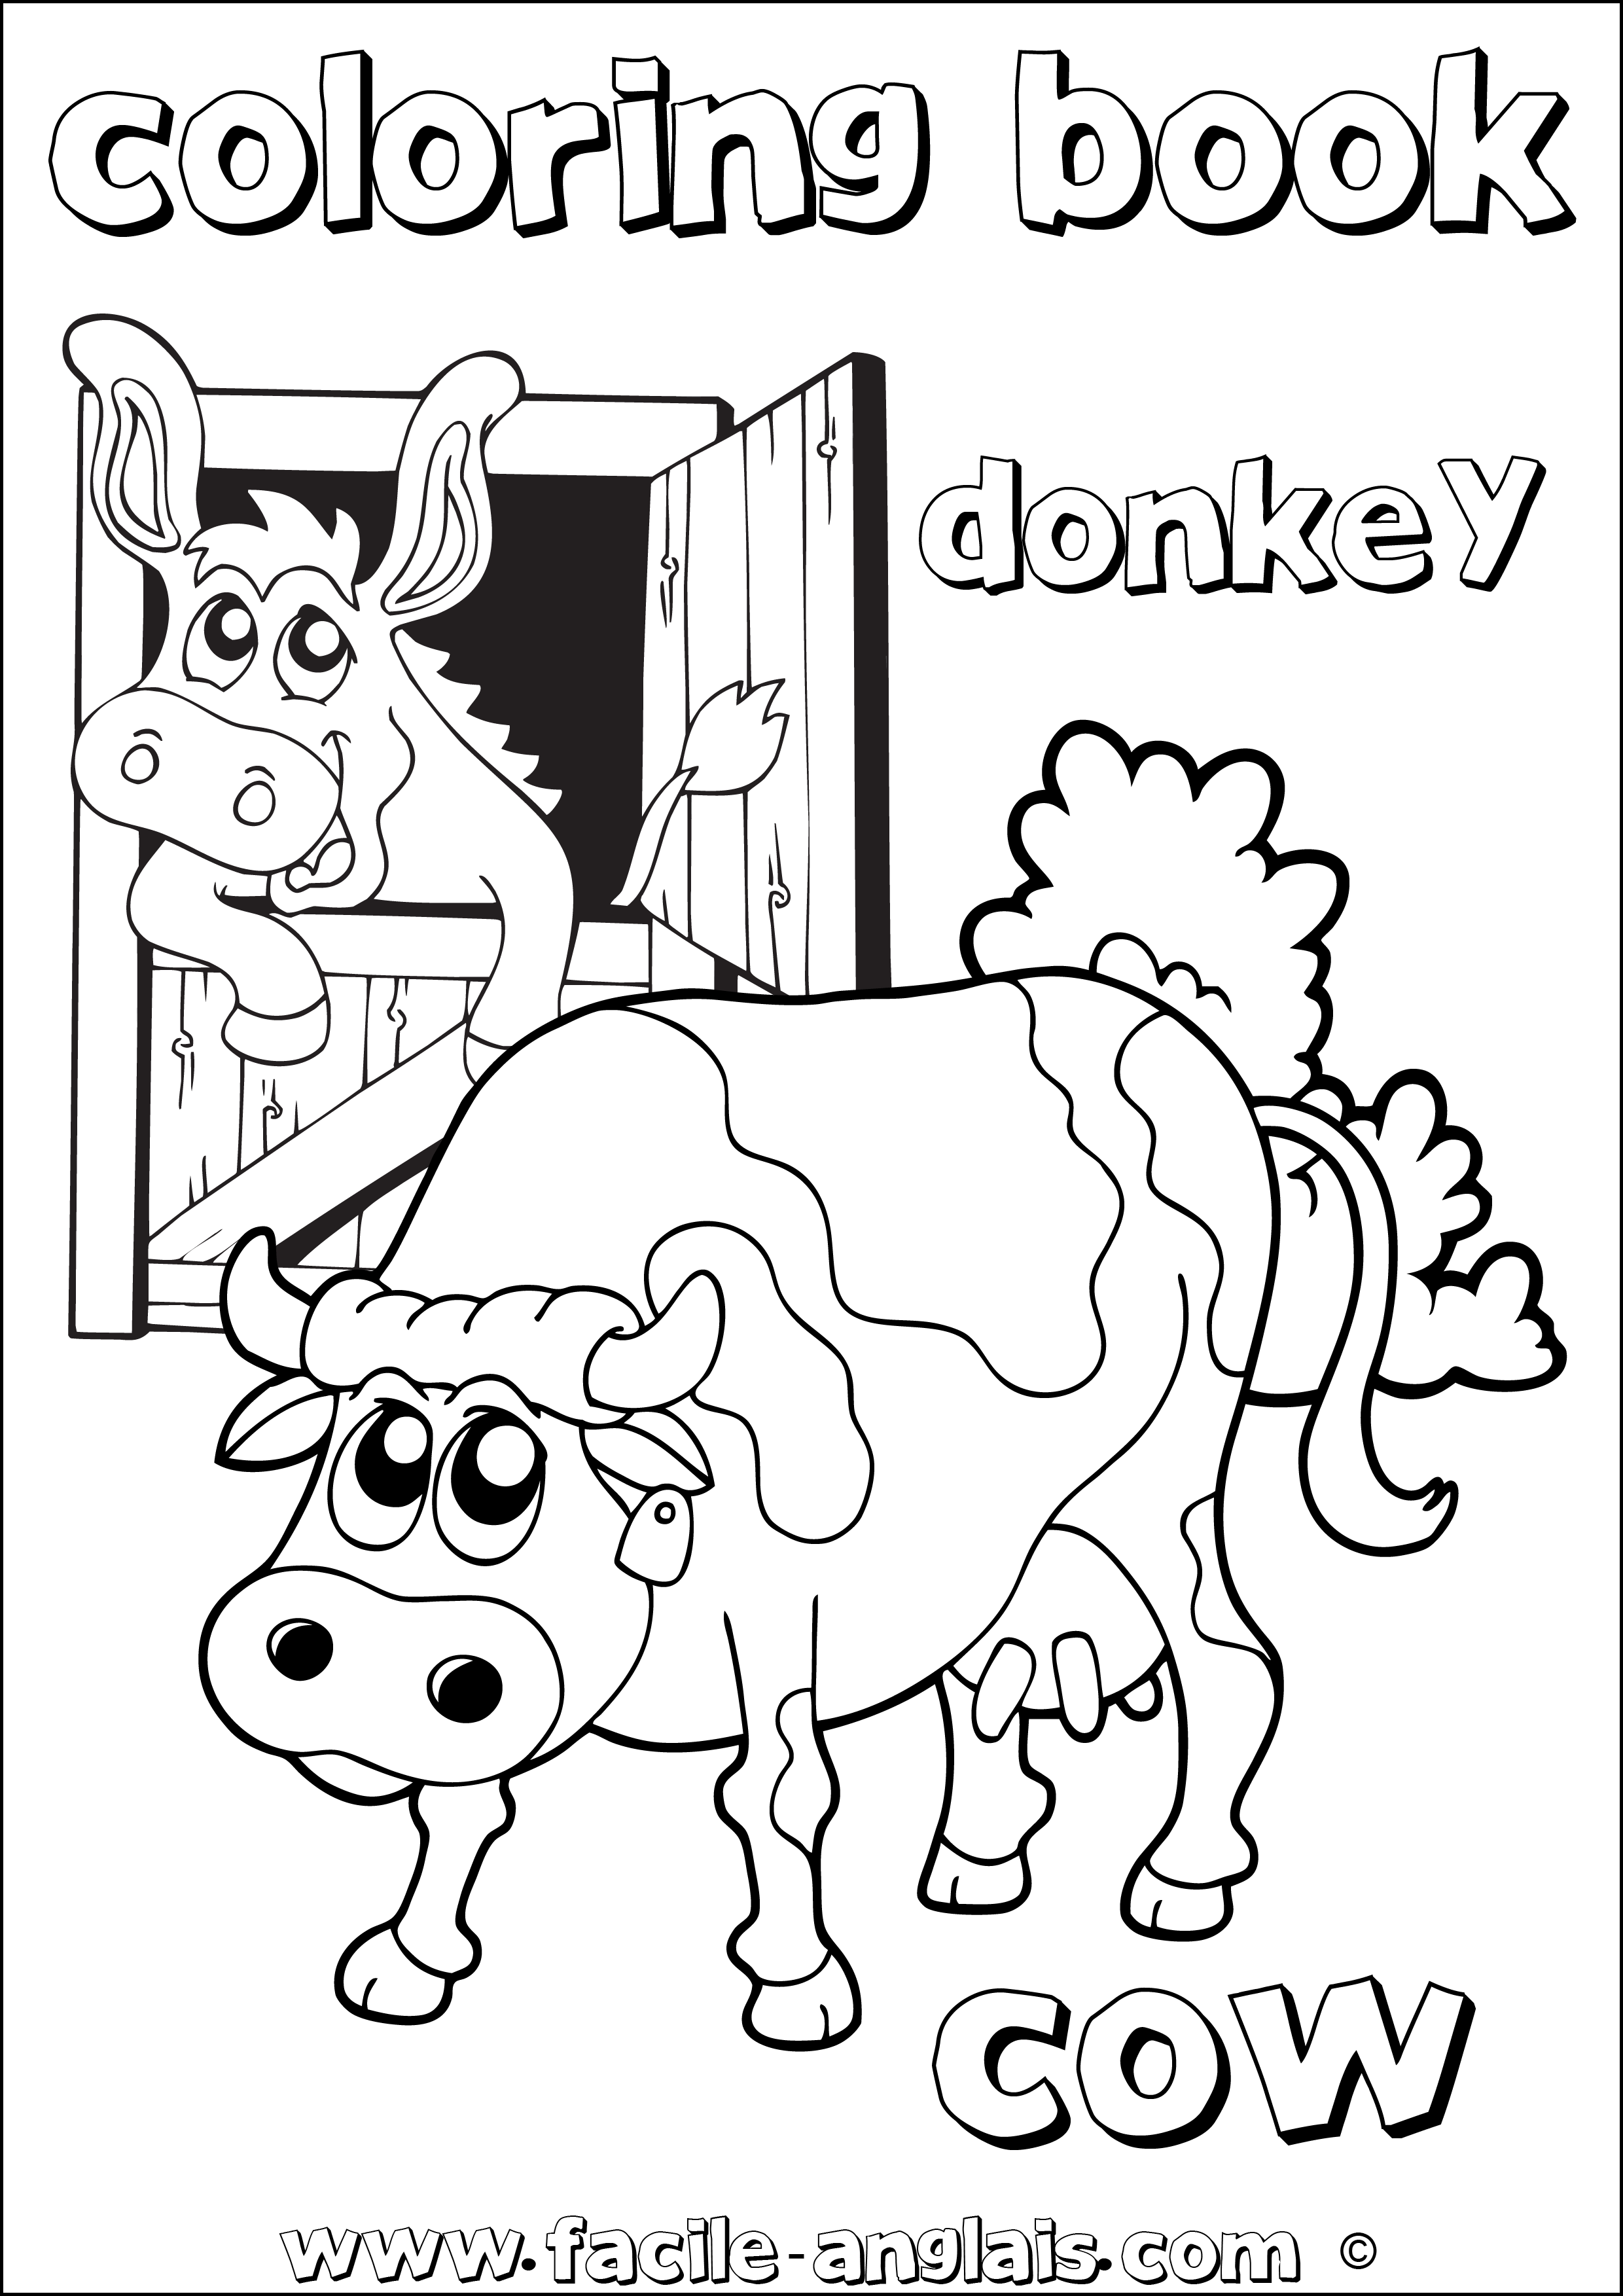 Coloring Book Cow and Donkey (Coloriage Vache et Ane)